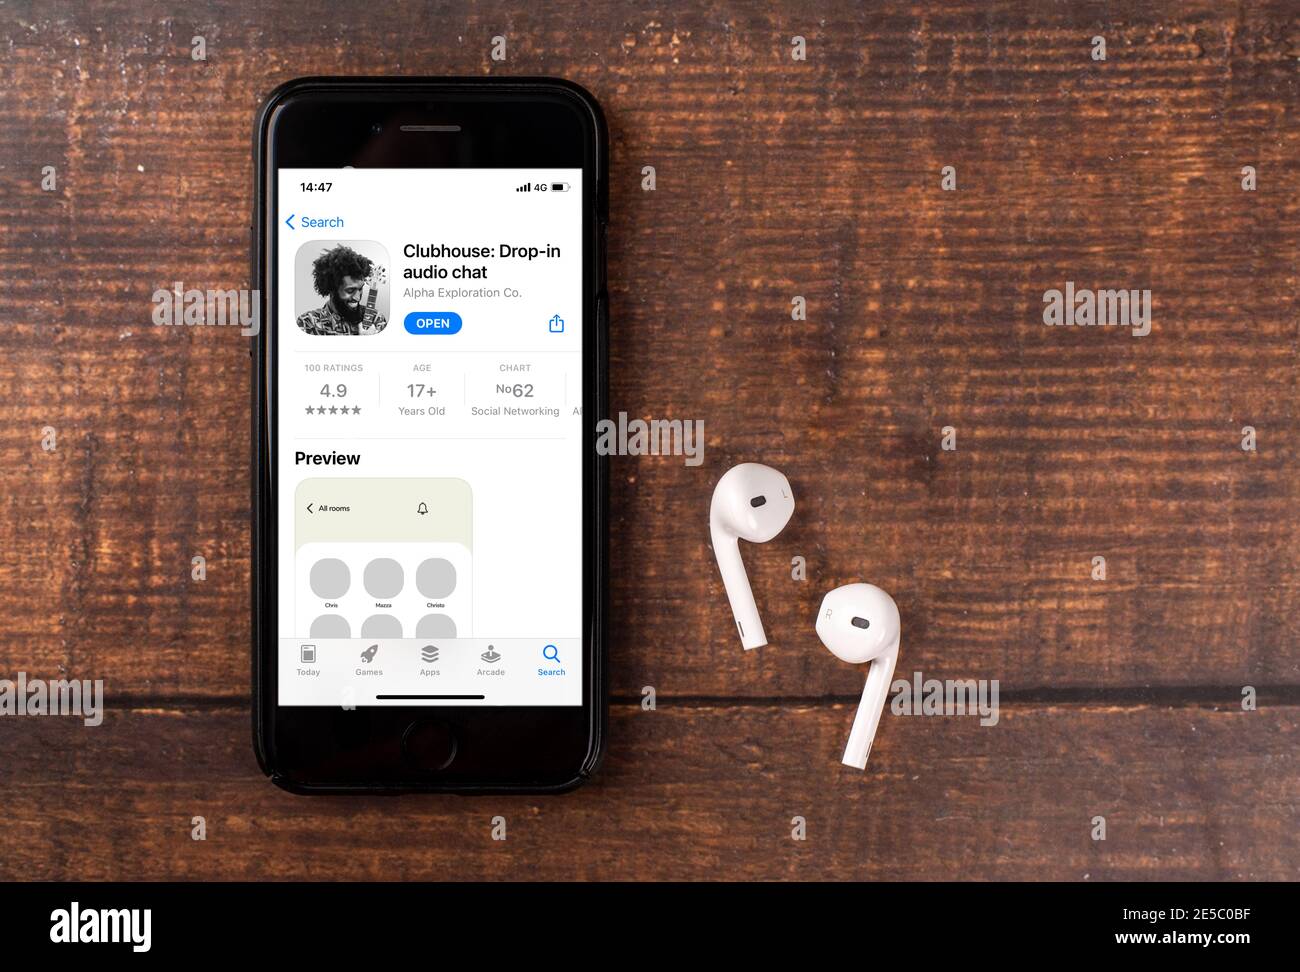 Antalya, Turkey - January 27, 2021: Clubhouse drop in audio chat application view on the smartphone. Stock Photo